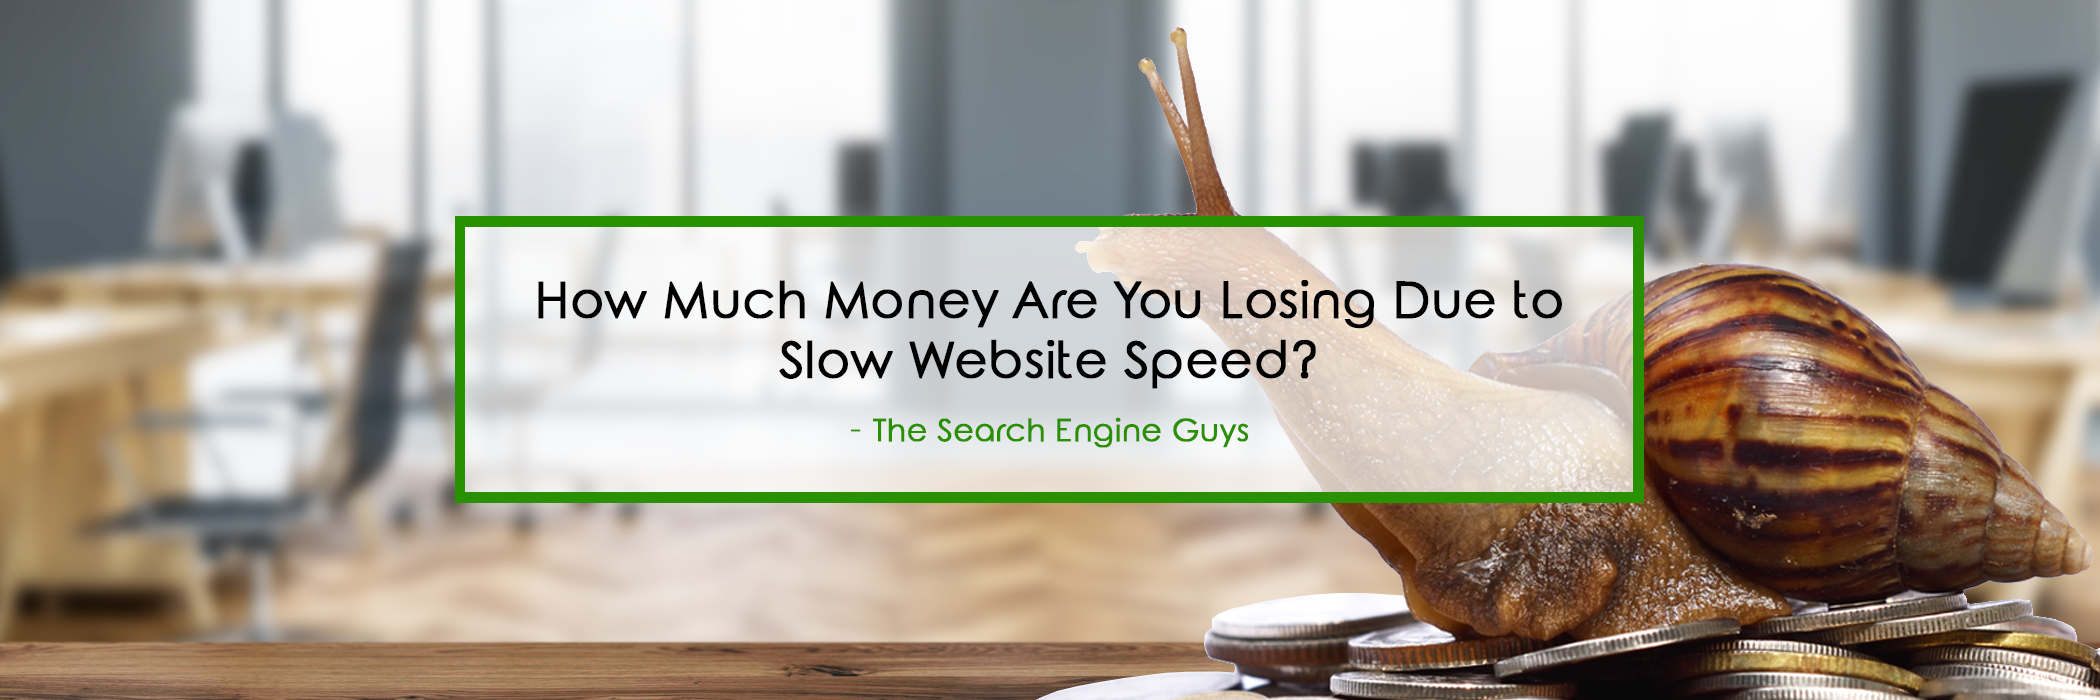 How much money are you losing due to slow website speed?